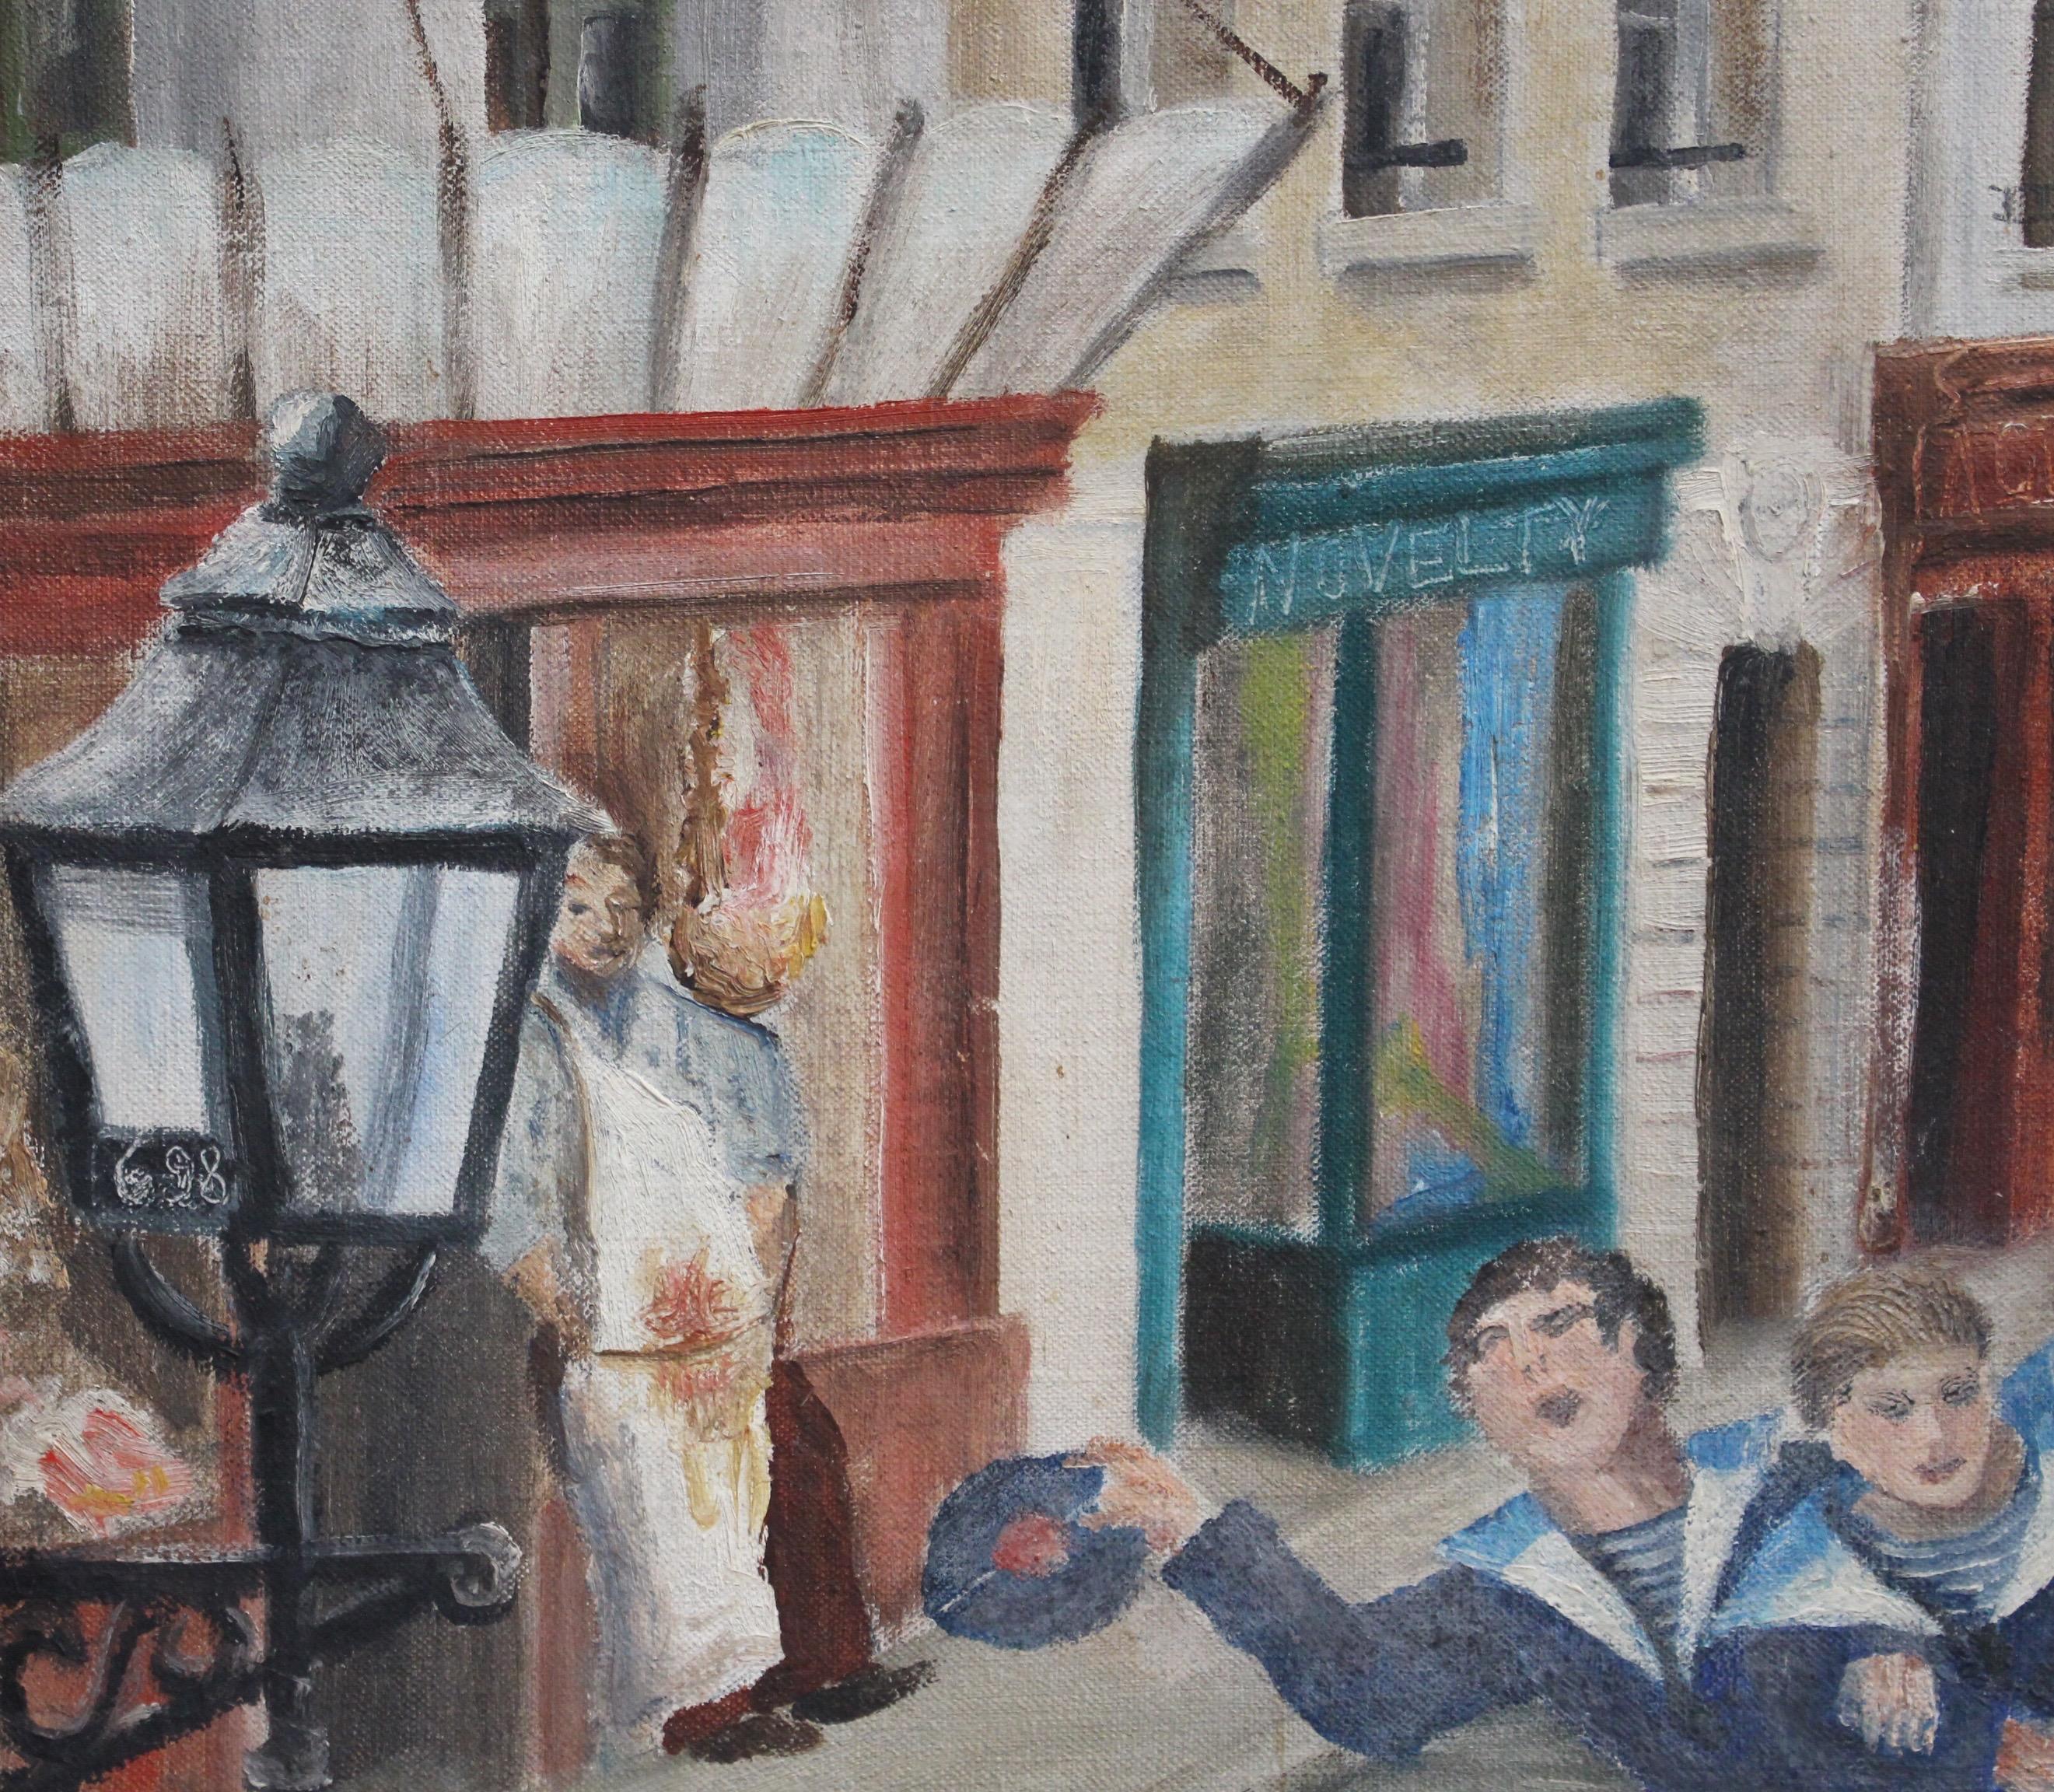 'La Bordée -Tacking in Front of the Old Curiosity Shop' French Sailors in London - Modern Painting by Hurel